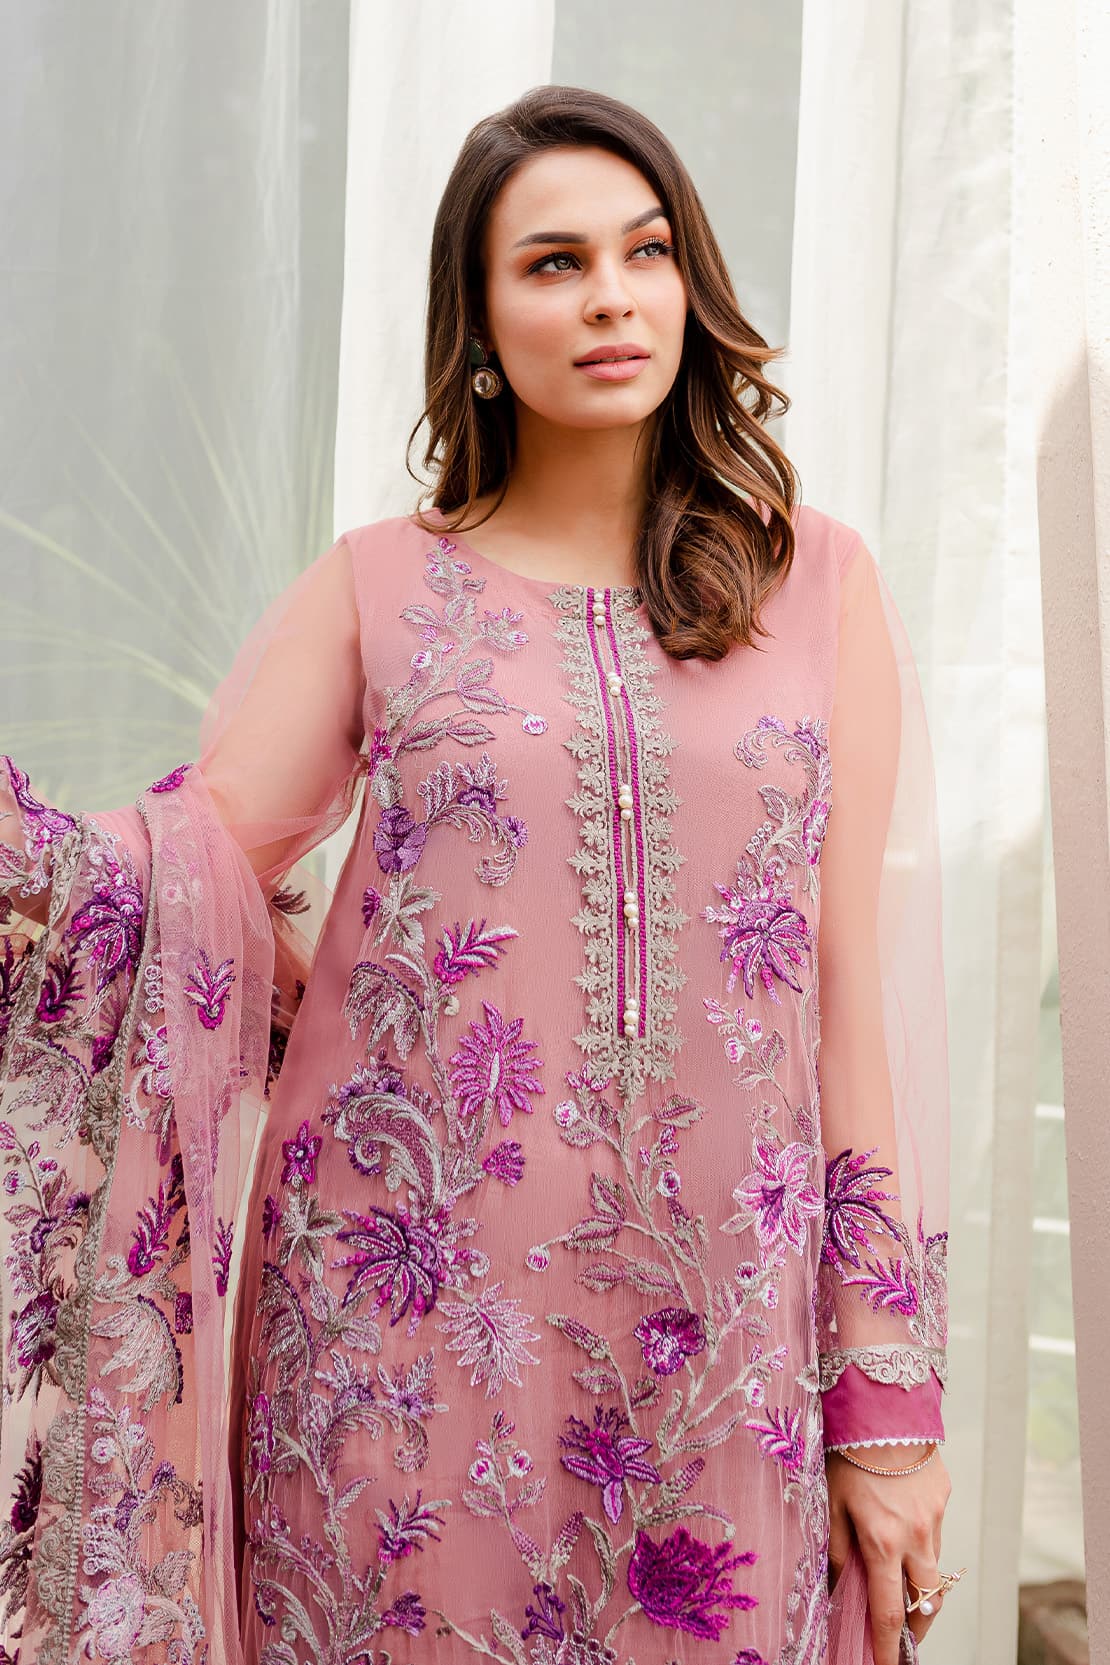 4 Piece – Ilana Blush Pink – Net Embroidered Suit